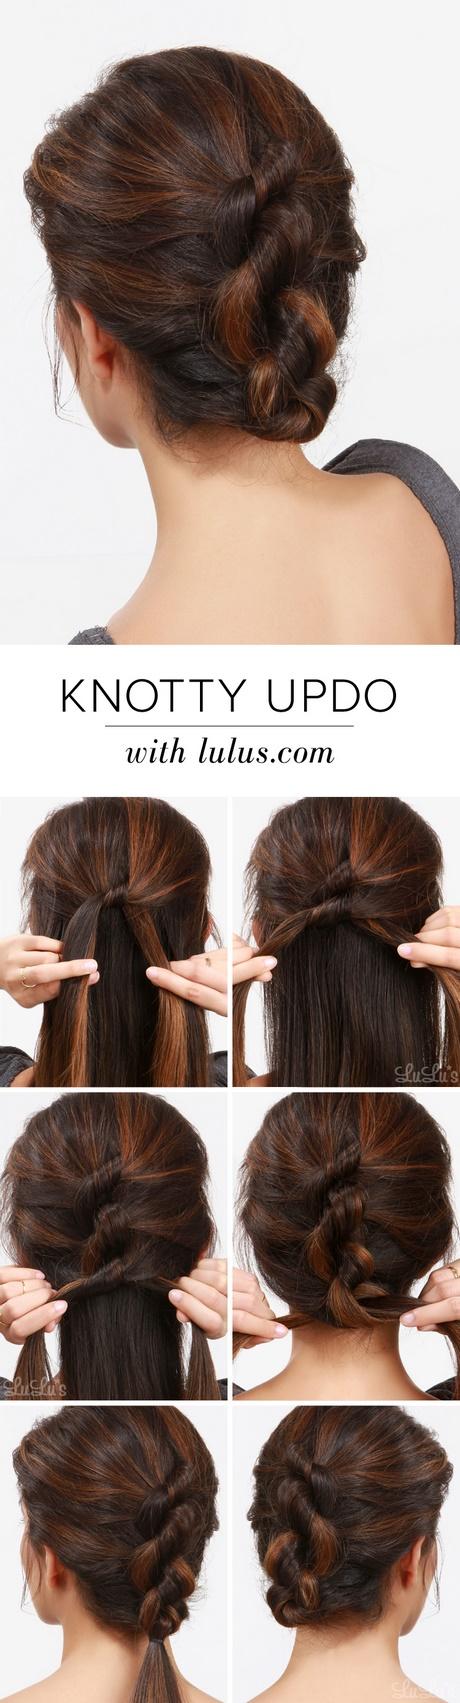 Hair updos you can do yourself hair-updos-you-can-do-yourself-60_10